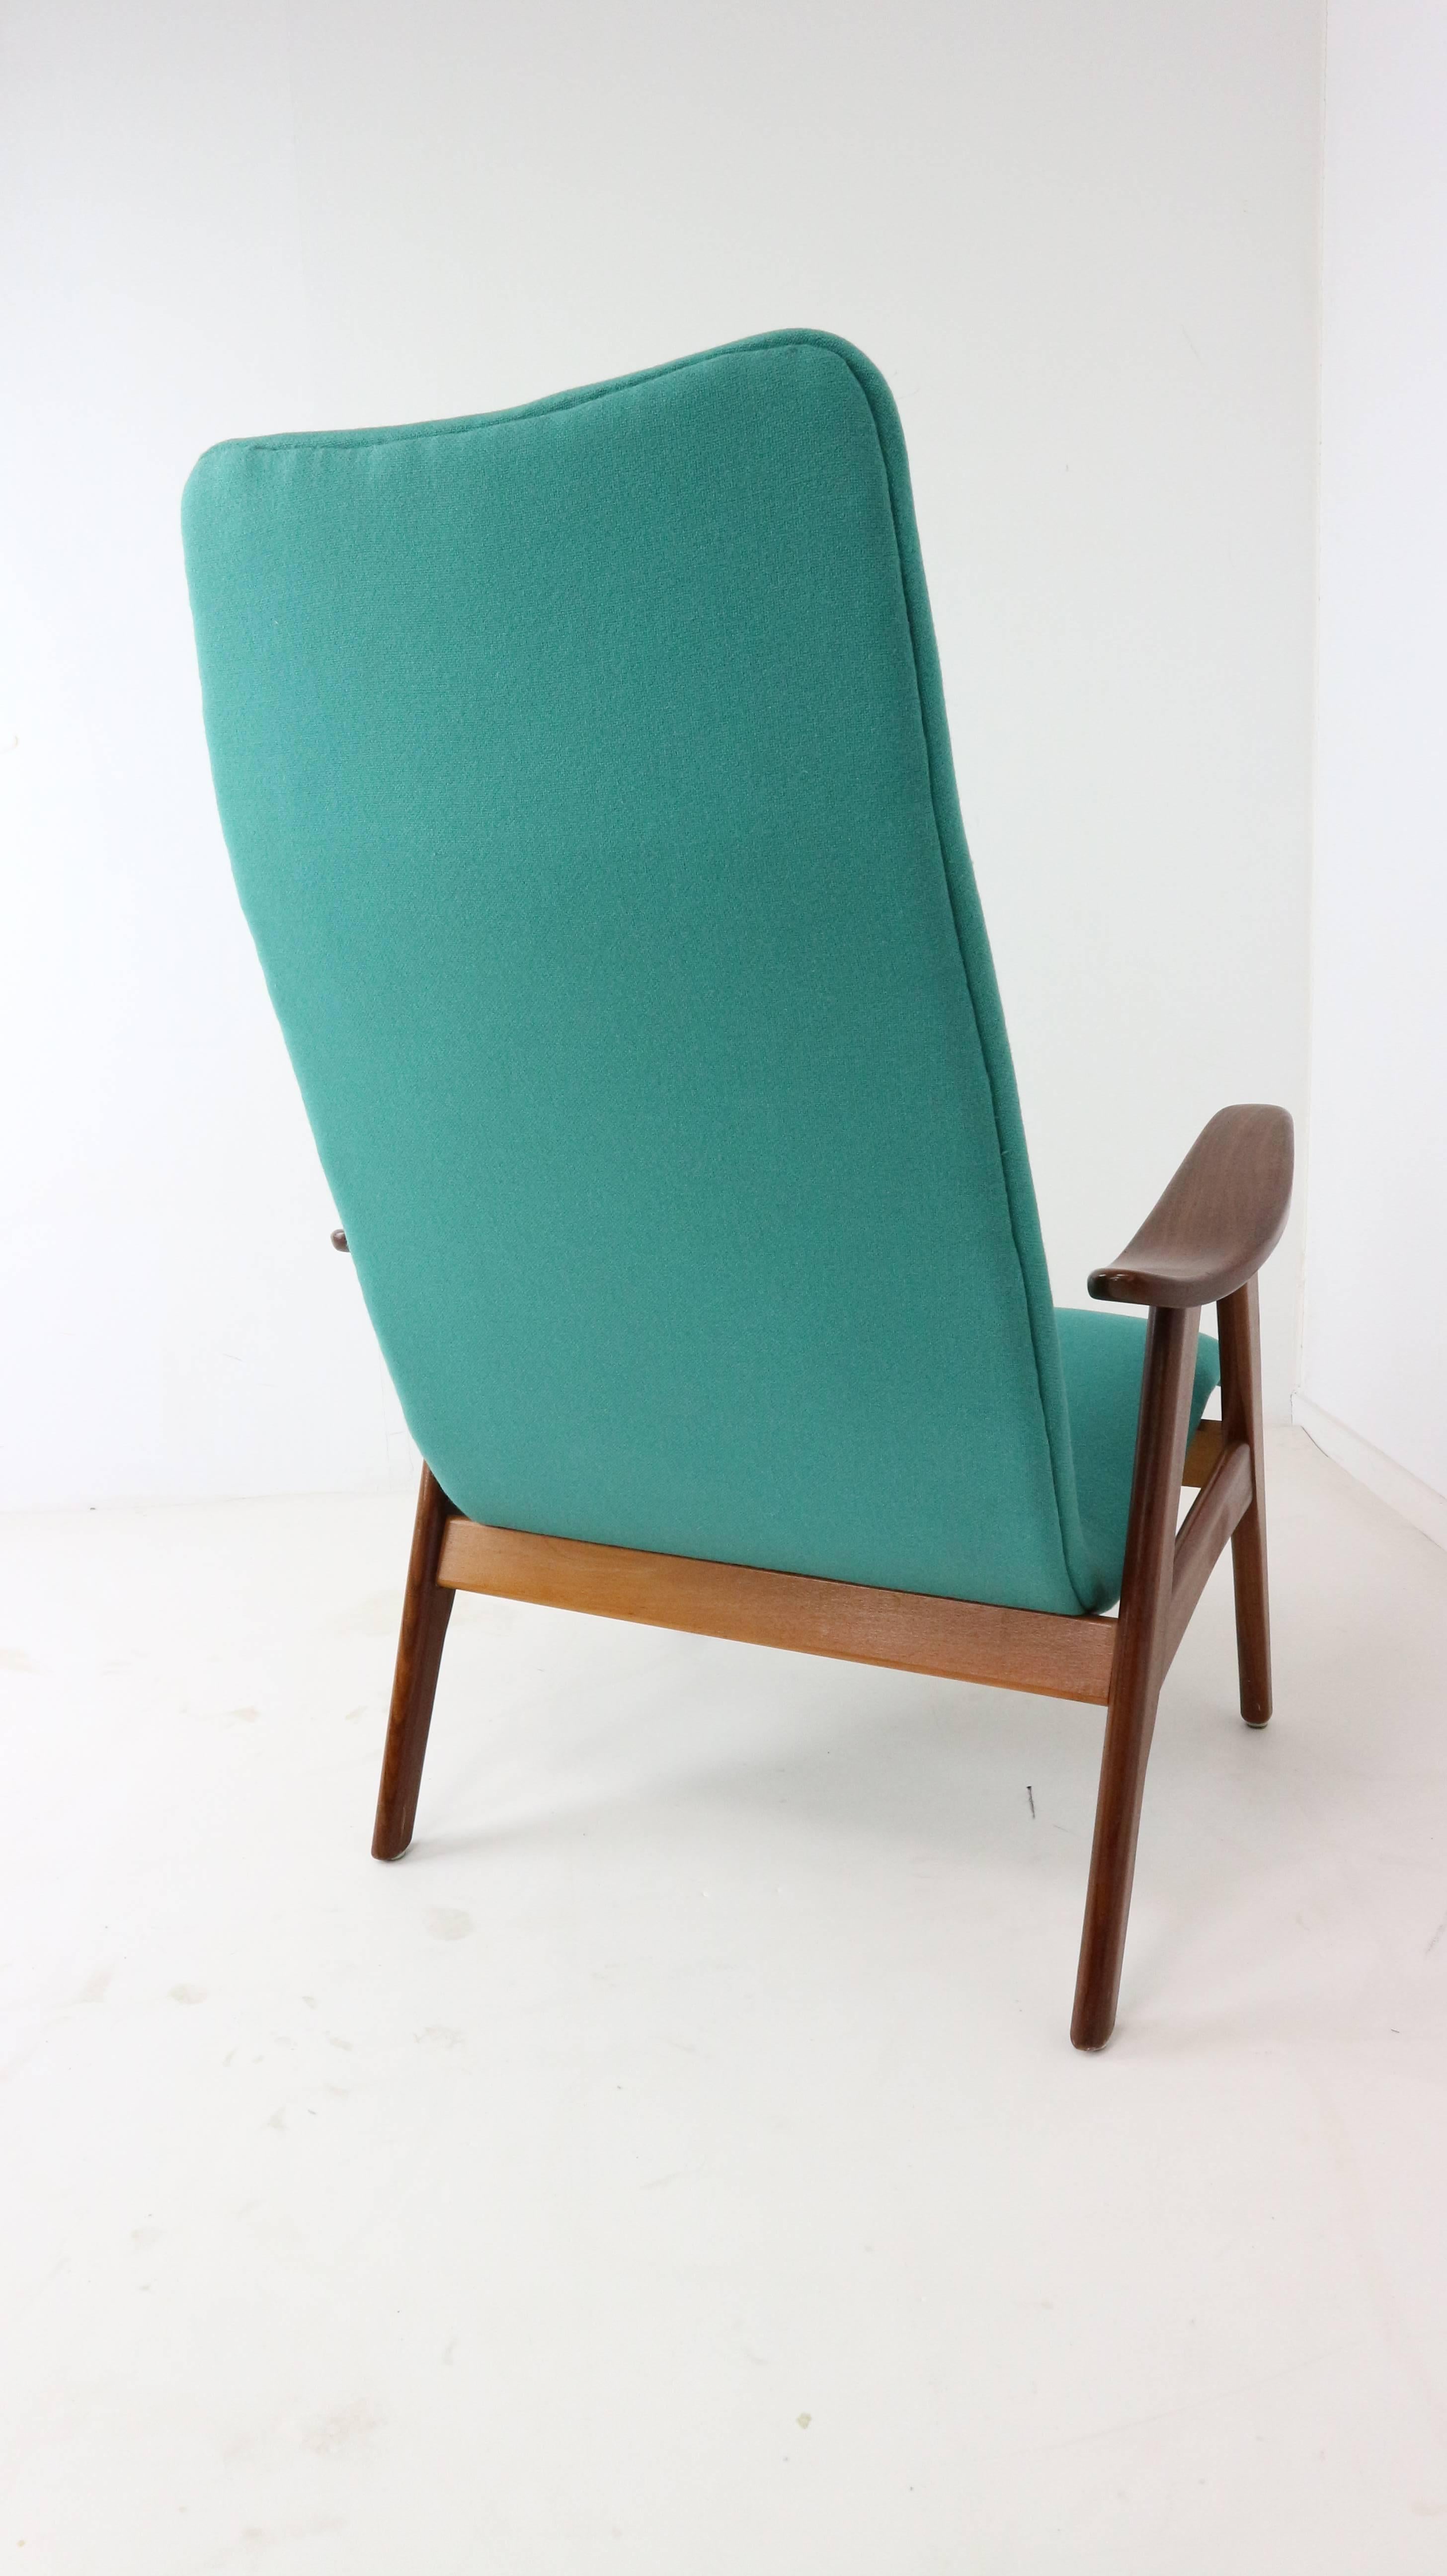 Dutch New Upholstered High Back Lounge Chair by Louis Van Teeffelen for Webe